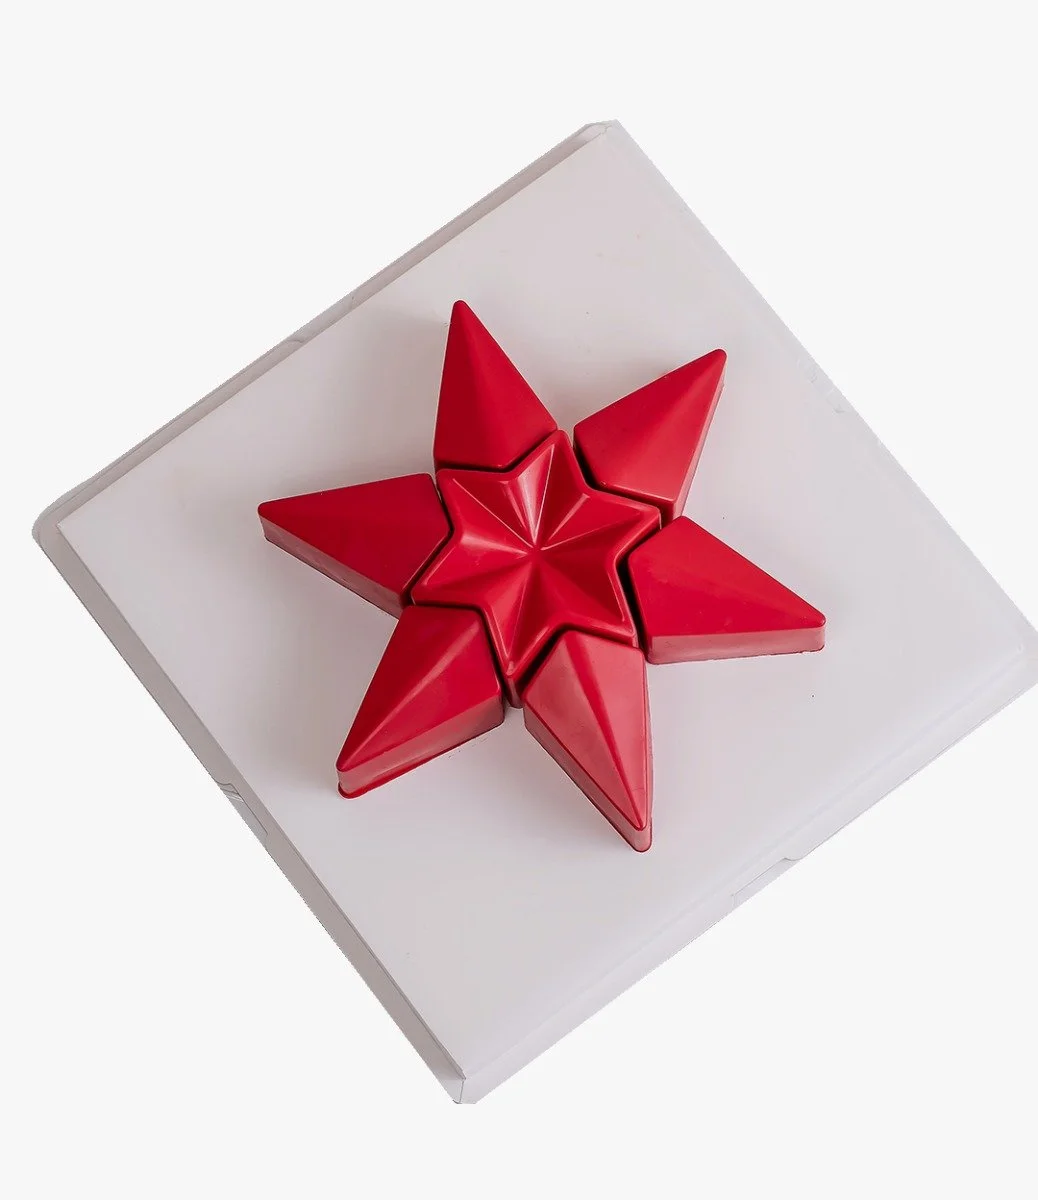 Star Shaped Cake by NJD